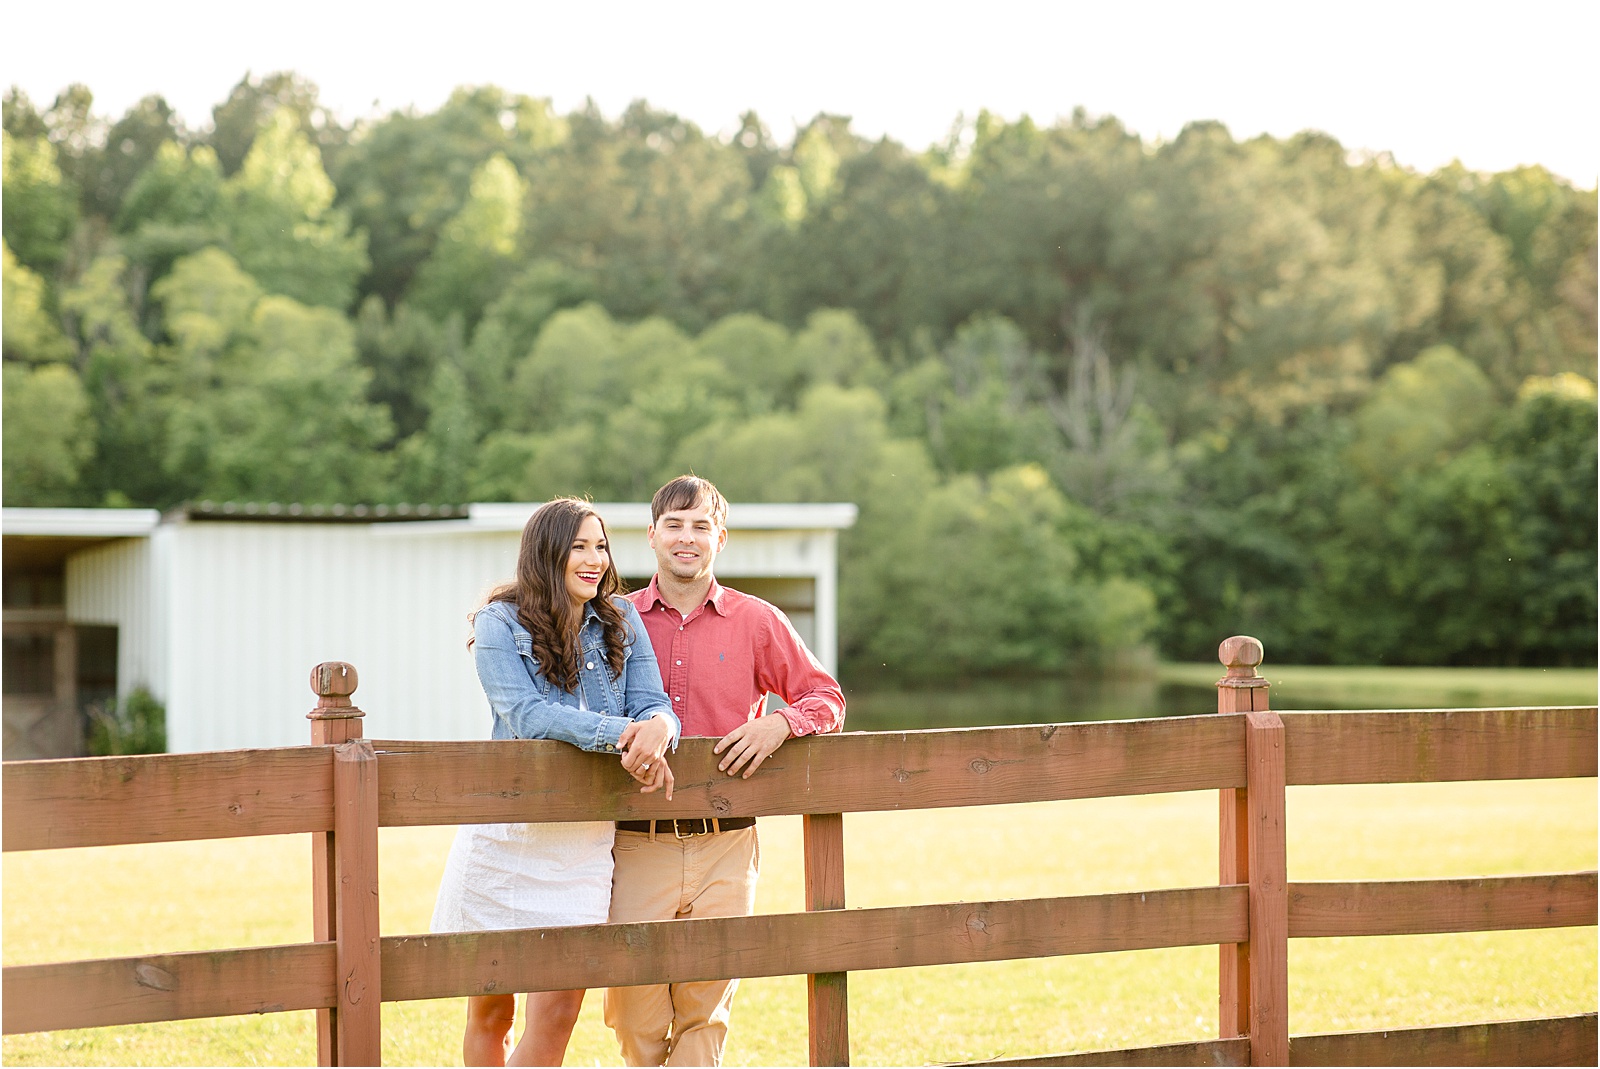 Engaged couple at rustic barn